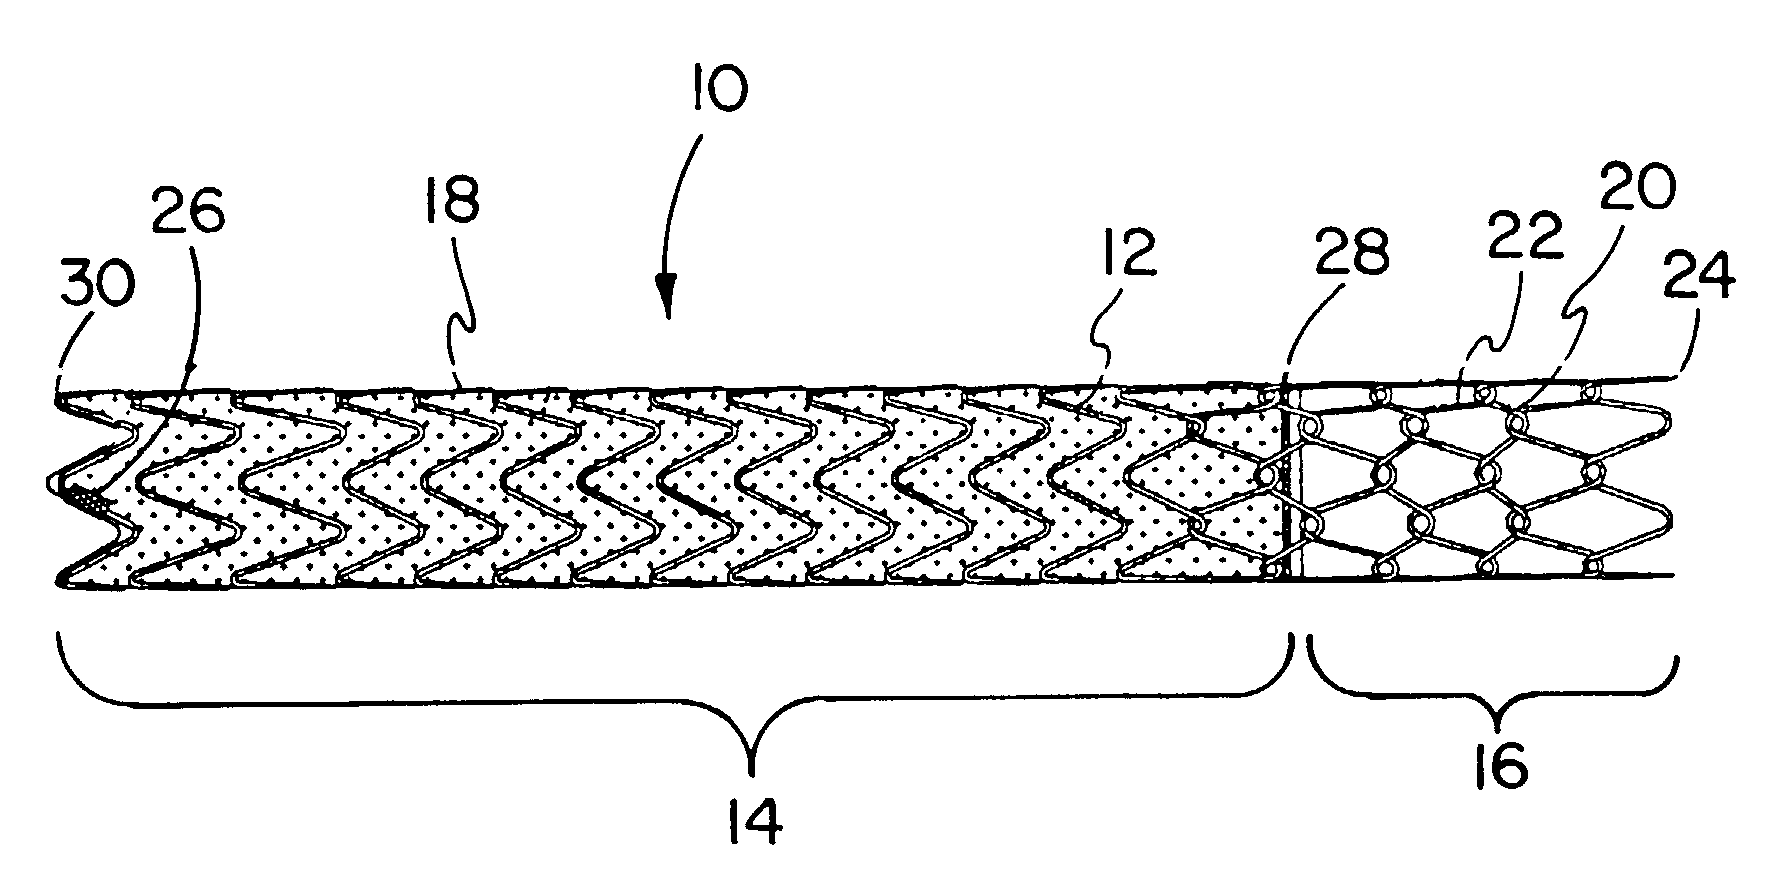 Covered endoprosthesis and delivery system